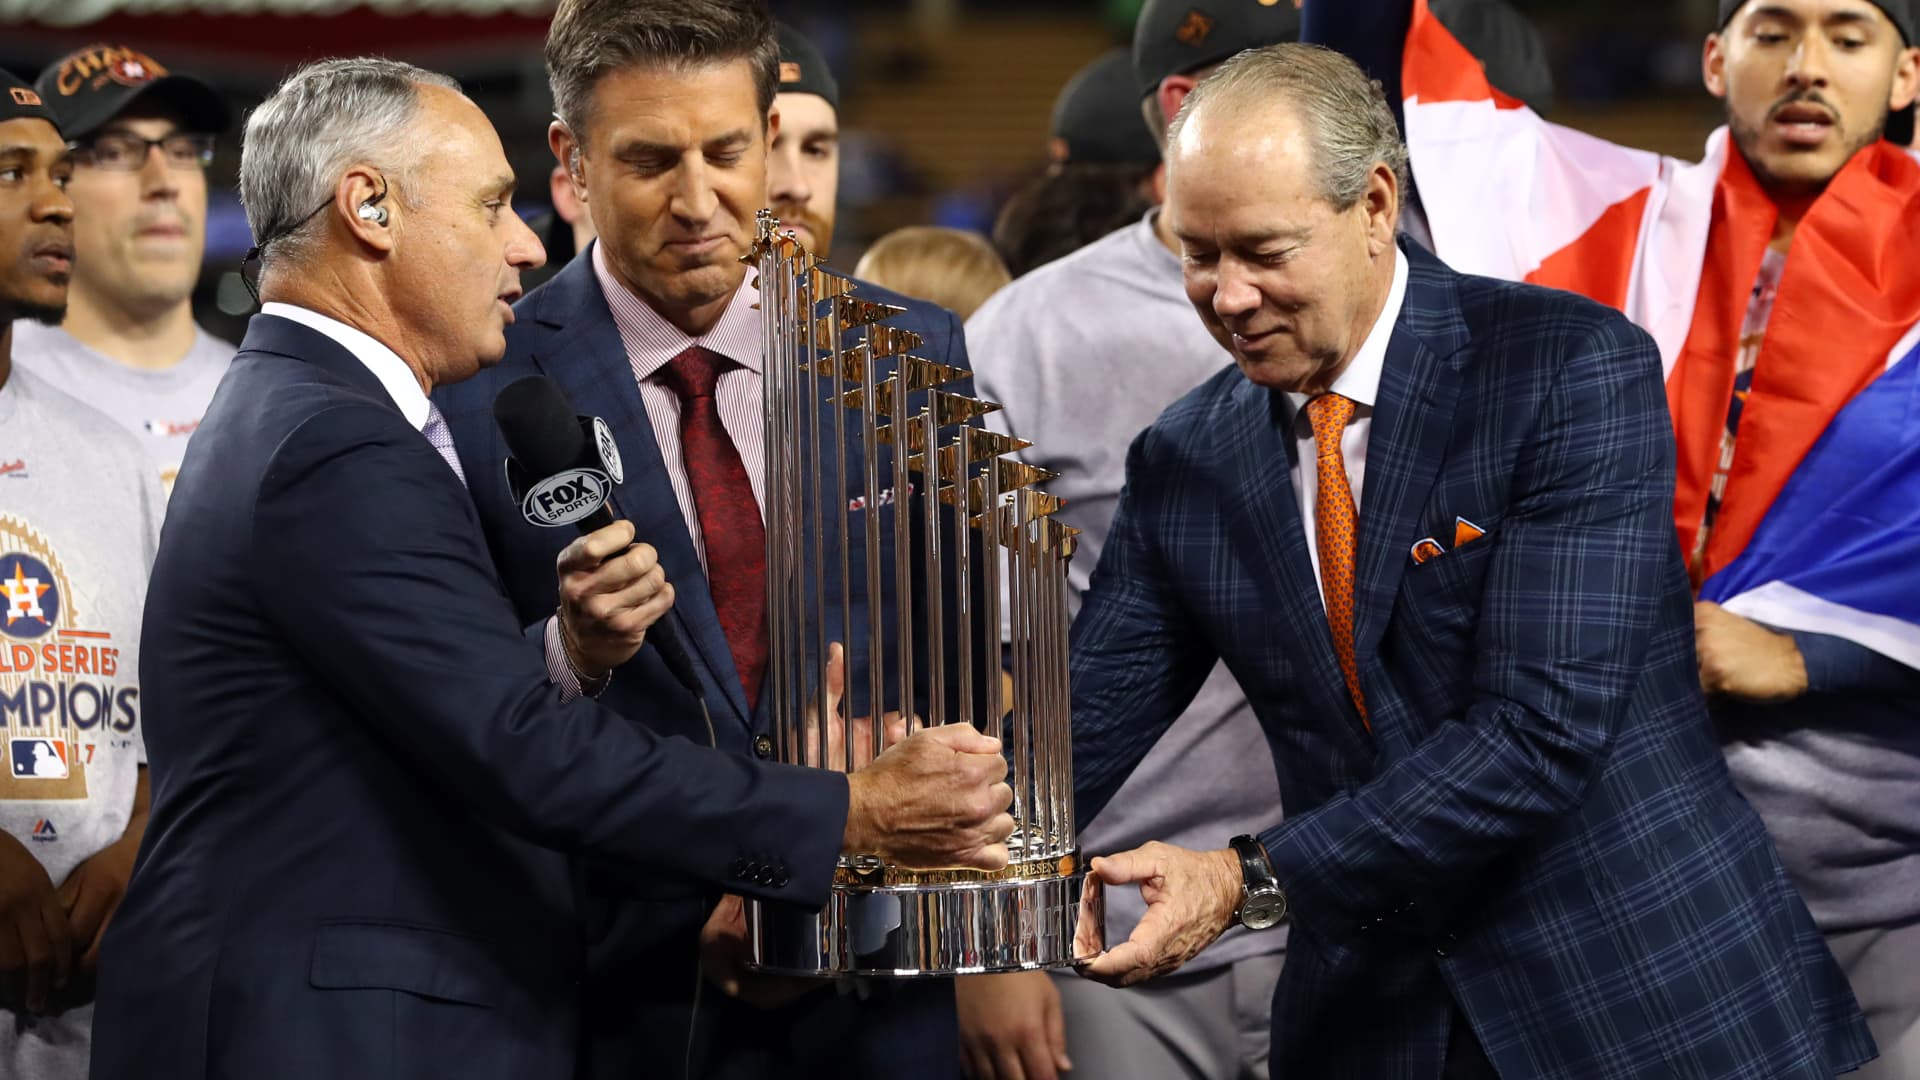 Major League Baseball Commissioner Robert D. Manfred Jr. presents the Commissioner's Trophy to the Houston Astros owner Jim Crane after the Astros defeated the Los Angeles Dodgers in Game 7 of the 2017 World Series at Dodger Stadium on Wednesday, November 1, 2017 in Los Angeles, California.